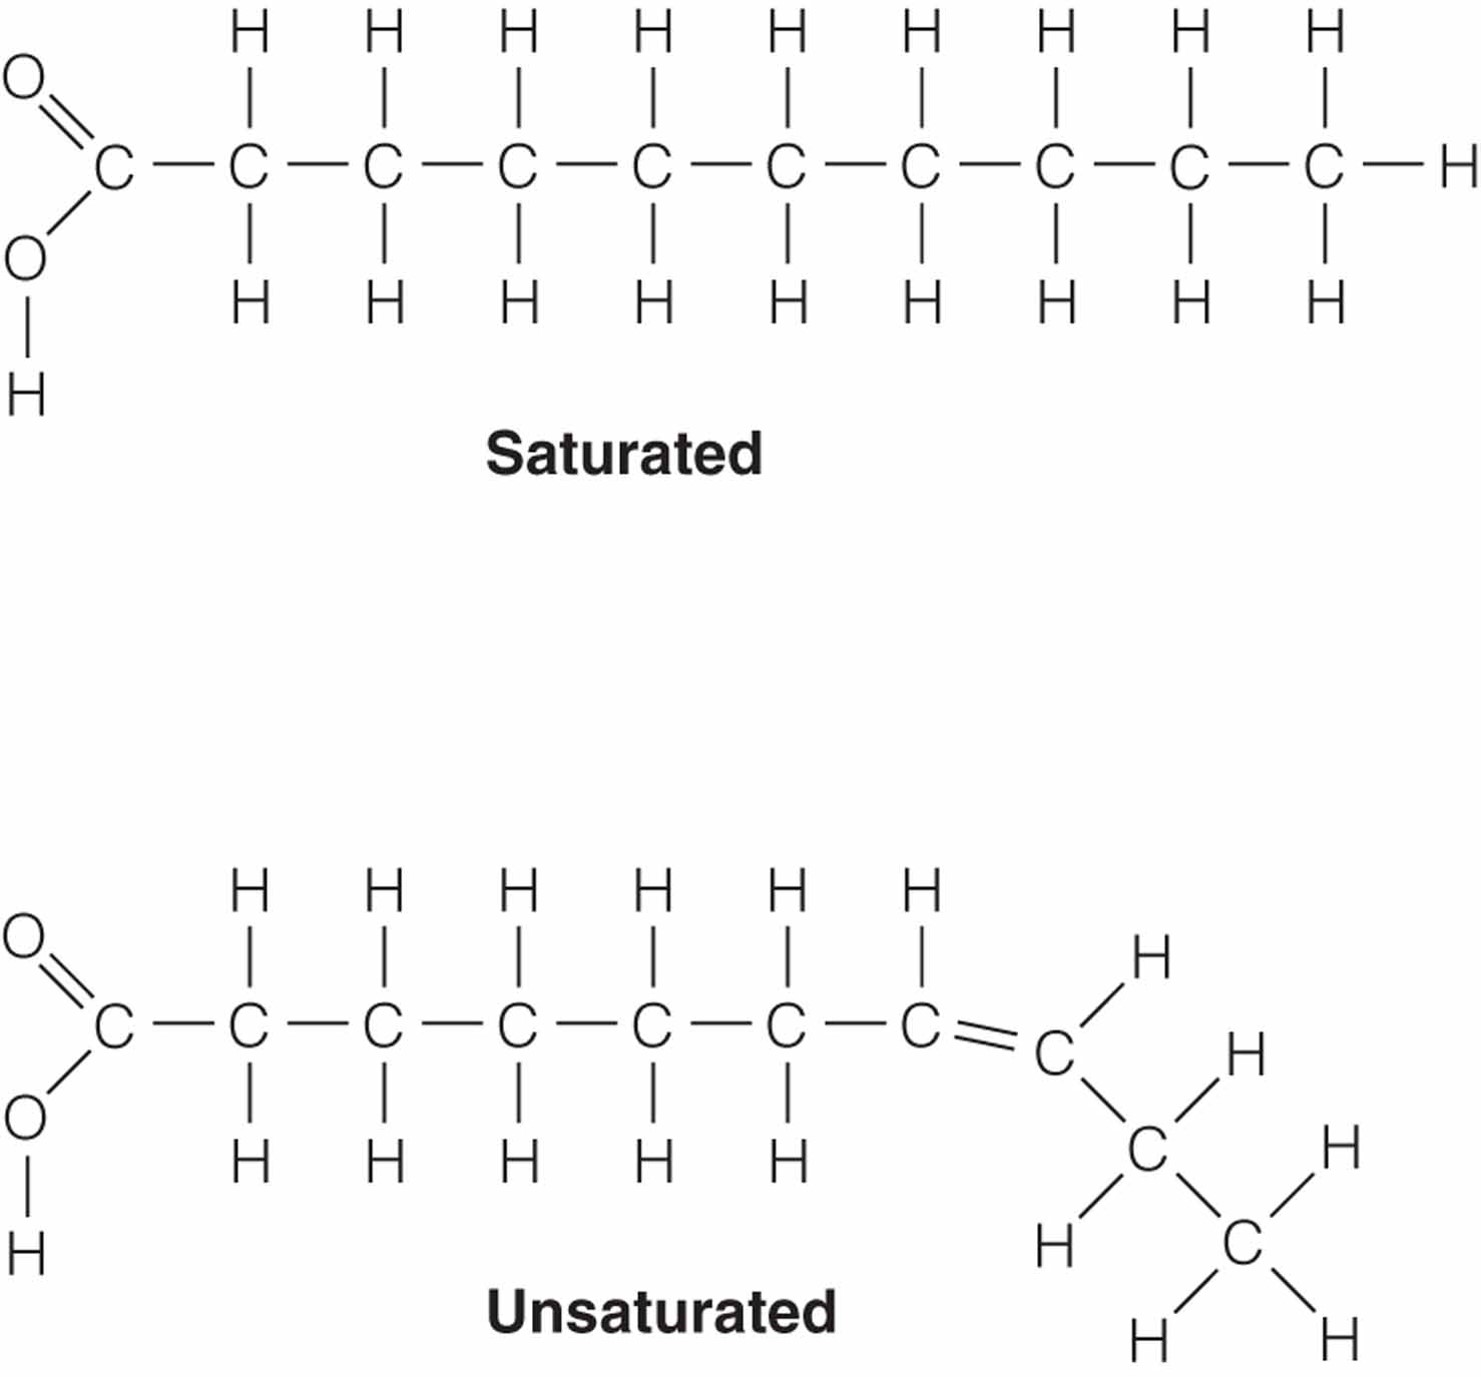 Saturated and Unsaturated Fat Structure.